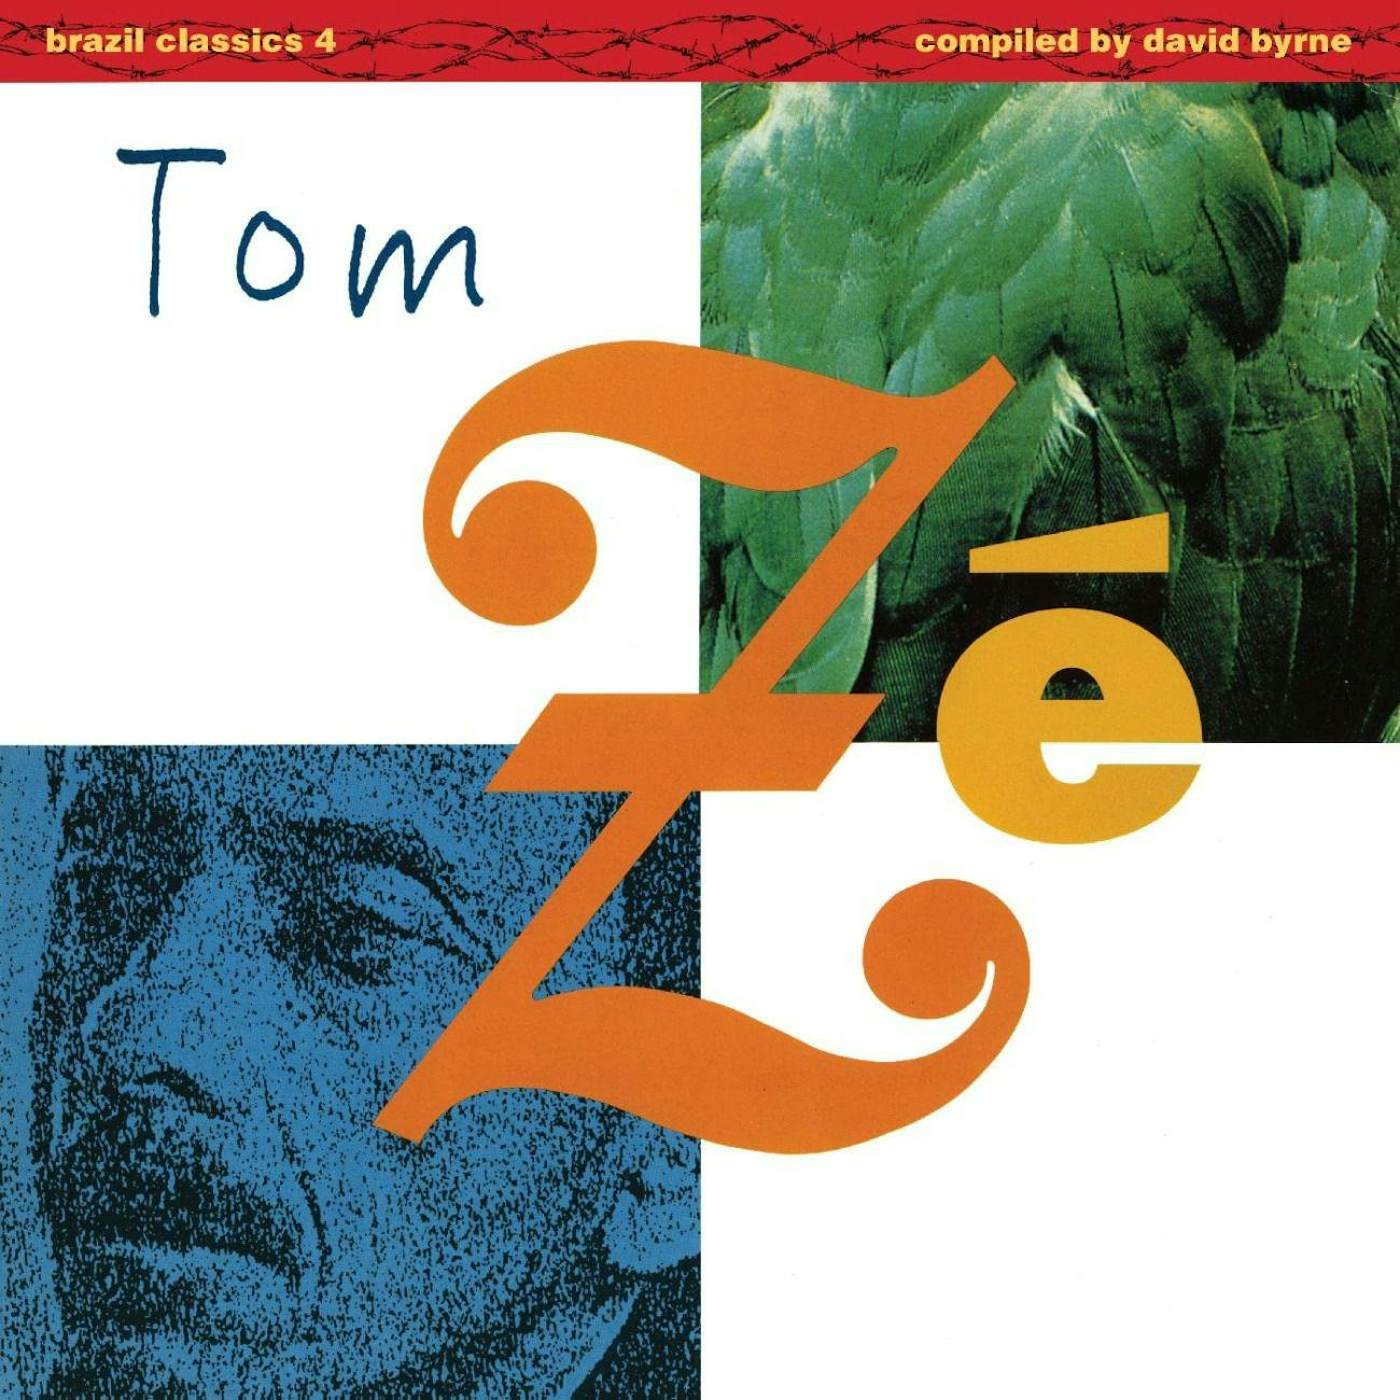 Brazil Classics 4: Massive Hits - The Best of Tom Zé (Compiled by David Byrne) Vinyl Record